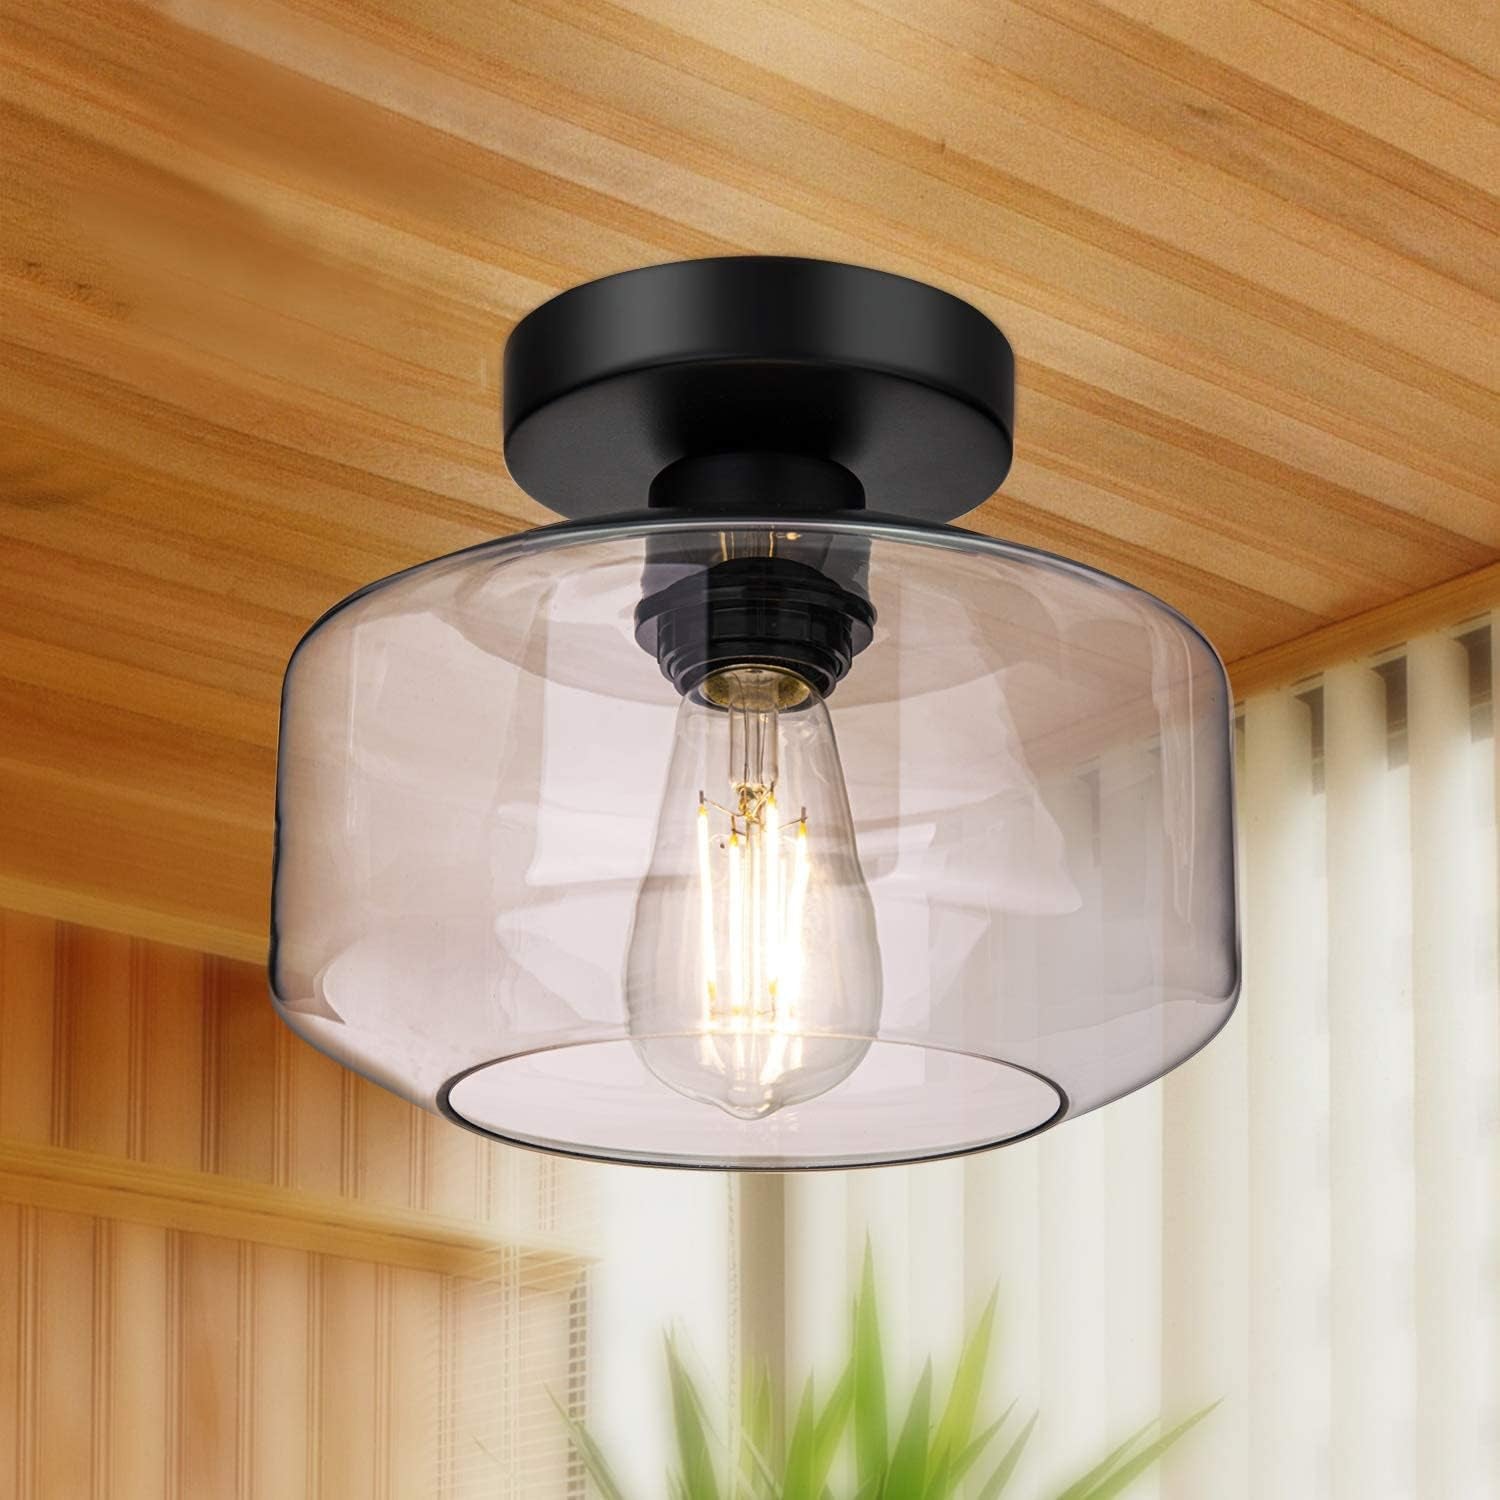 Semi Flush Mount Ceiling Light, 900 Lumen LED Bulb Included, Ceiling Light Fixture, Farmhouse Light Fixture with Clear Glass Lamp Shade for Bedroom Hallway Dining Room Bathroom Corridor Passway